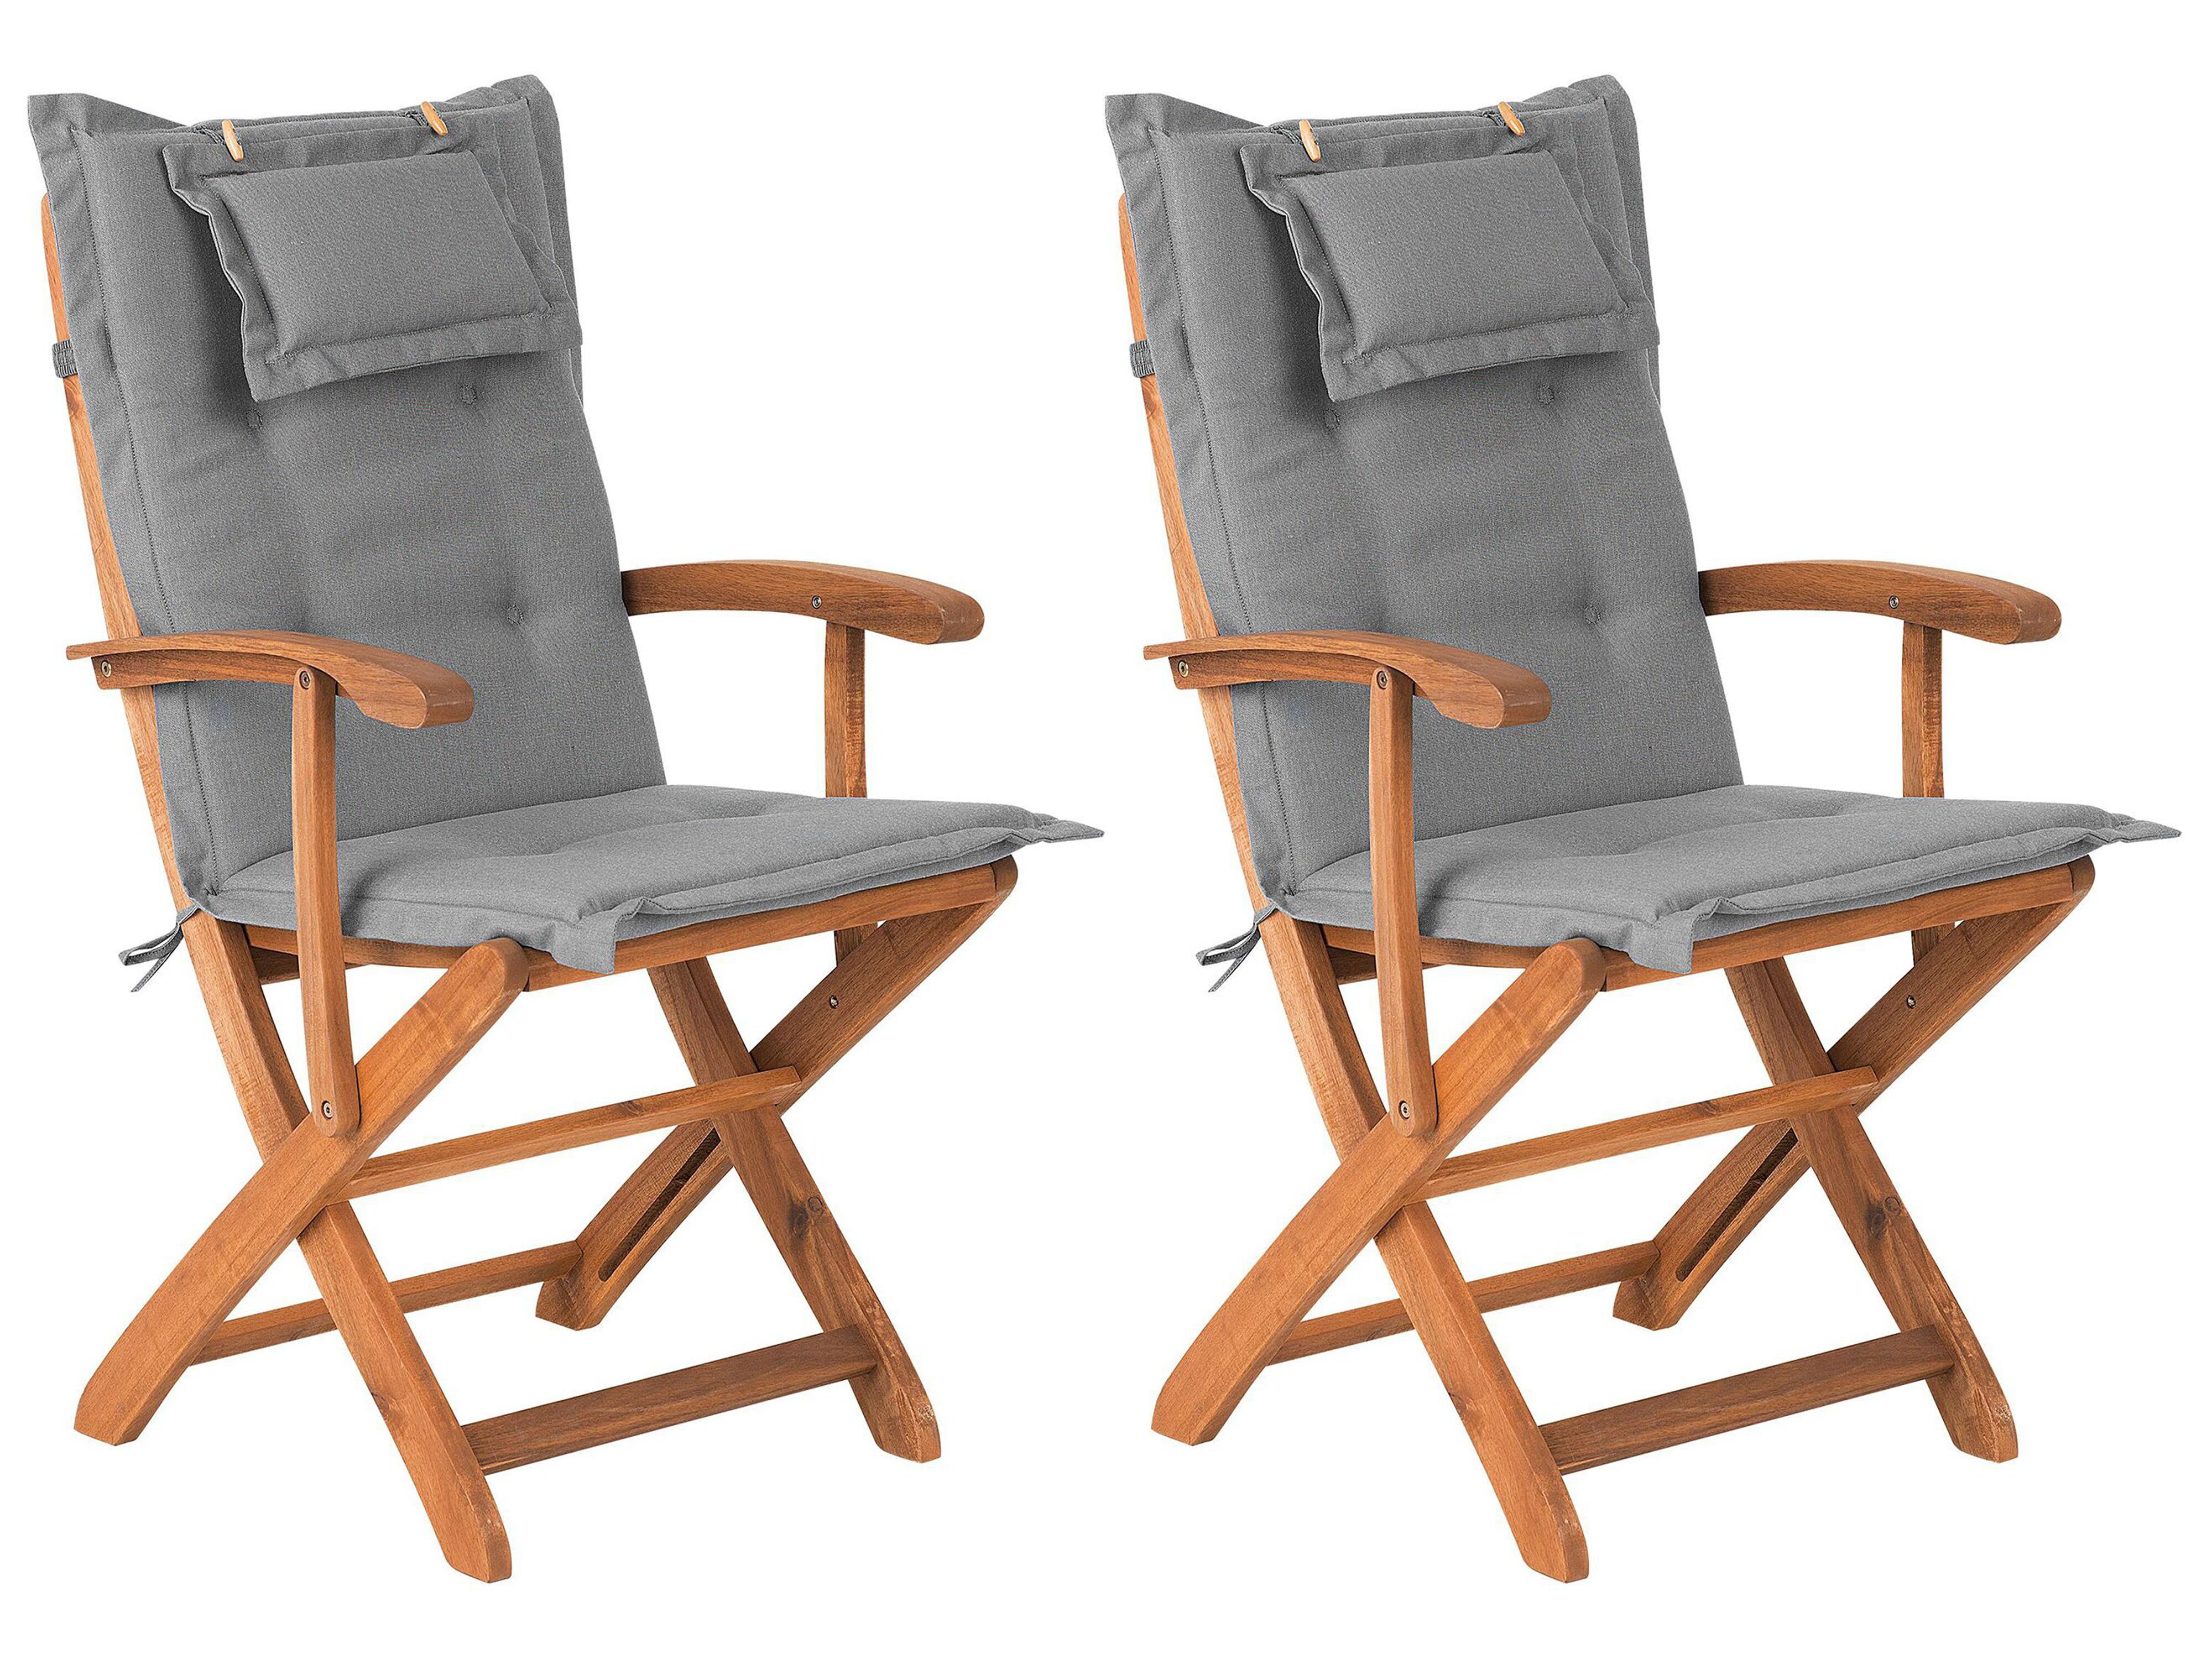 Set of 2 Garden Folding Chairs with Grey Cushions MAUI - Furniture, lamps &  accessories up to 70% off | Avandeo online store